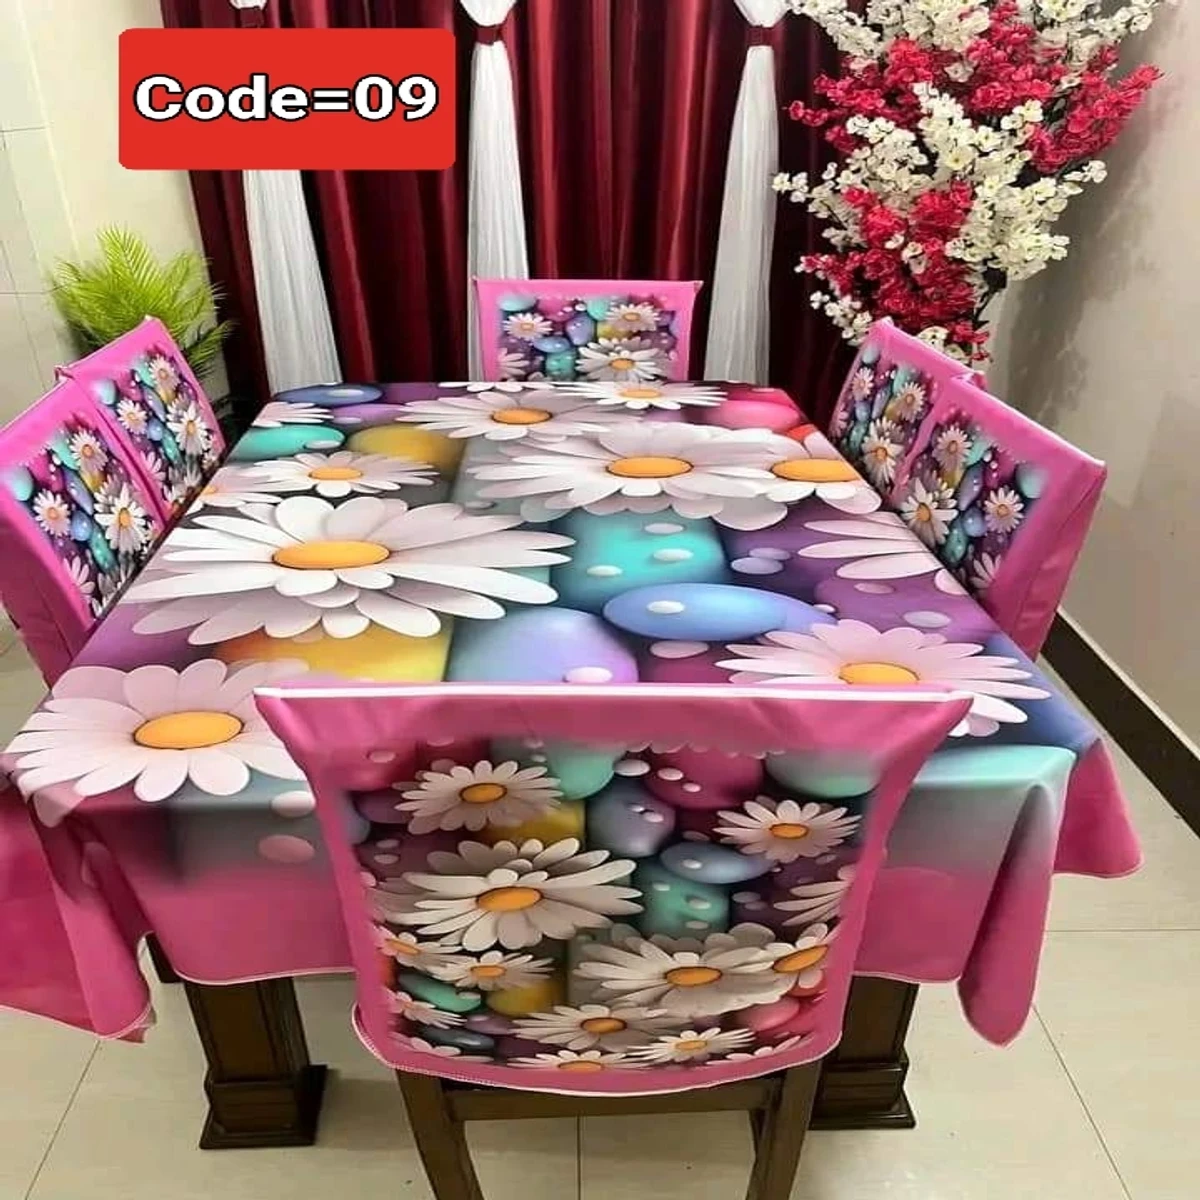 3D Pint Dining Table and Chair Cover Code=09